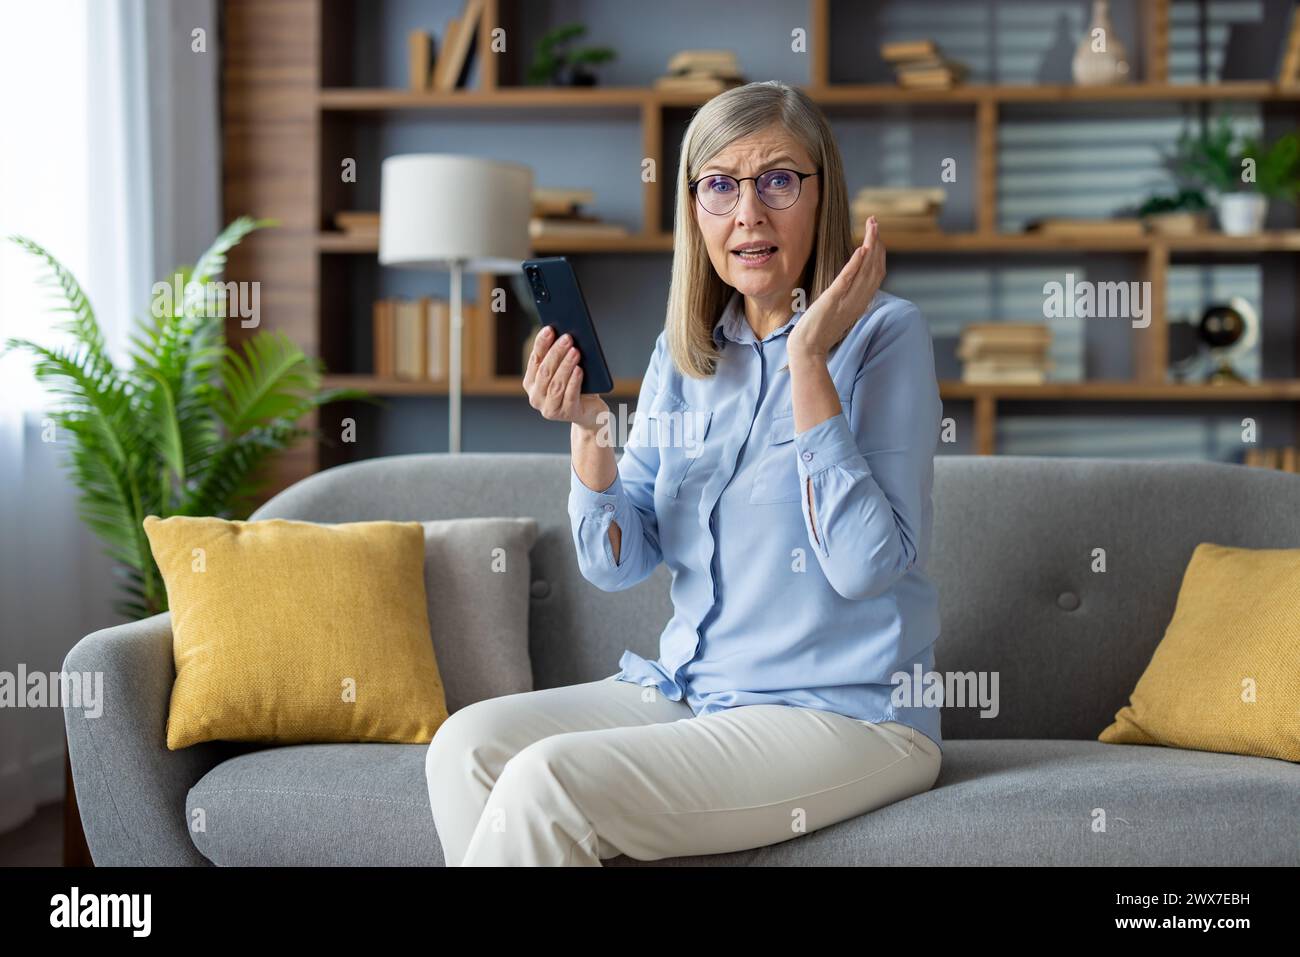 A mature adult woman sitting on a couch appears shocked and in disbelief while on a phone call in a cozy home setting. Stock Photo